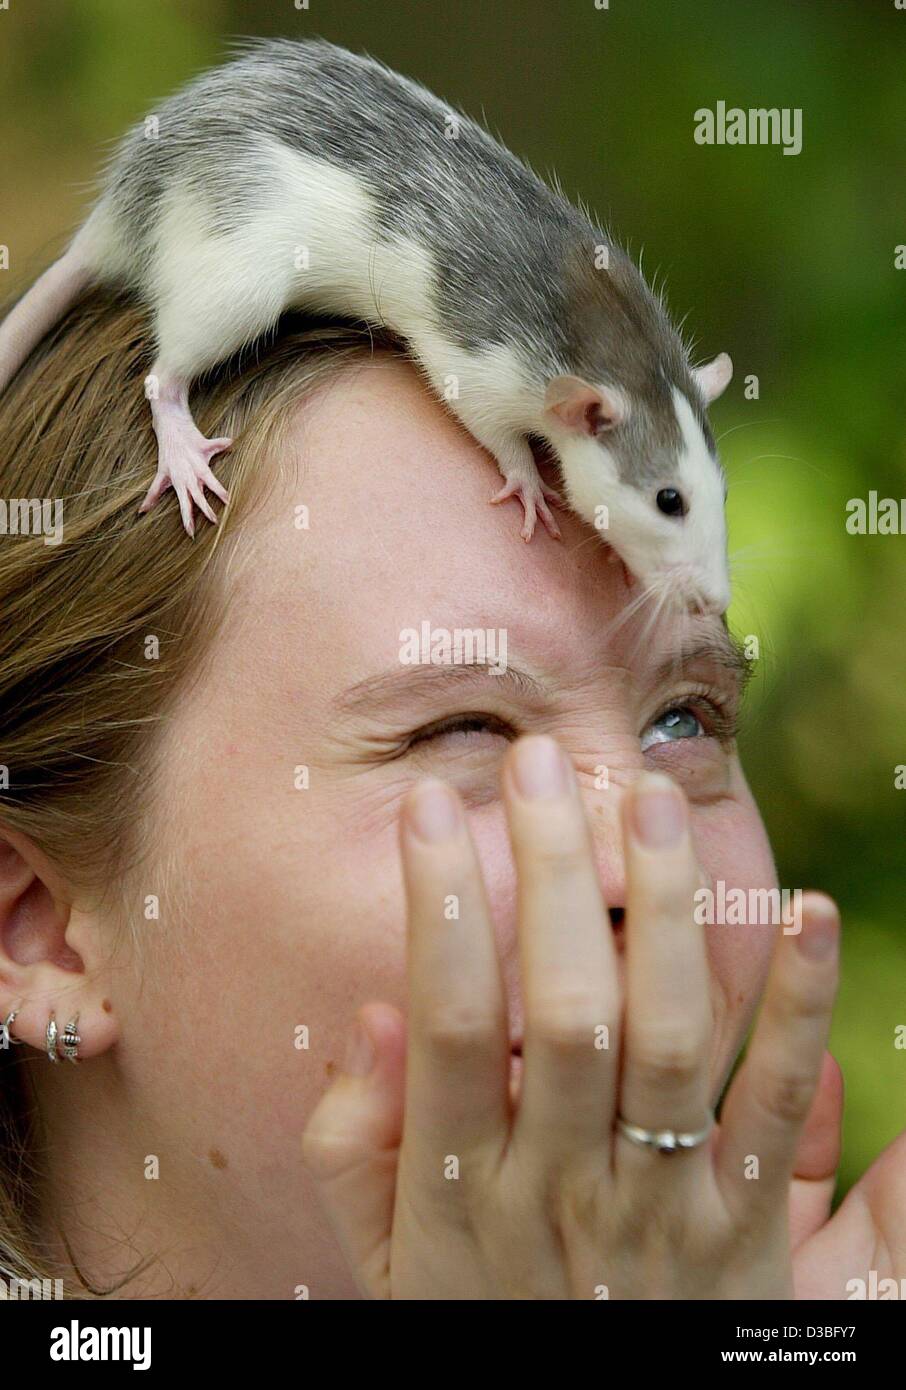 (dpa) - A tame rat is sitting on the forehead of a its owner, Frankfurt, Germany, 10 June 2003. Maike's hands don't express disgust but sorrow about 'Teufelin' (she-devil) falling down. Stock Photo